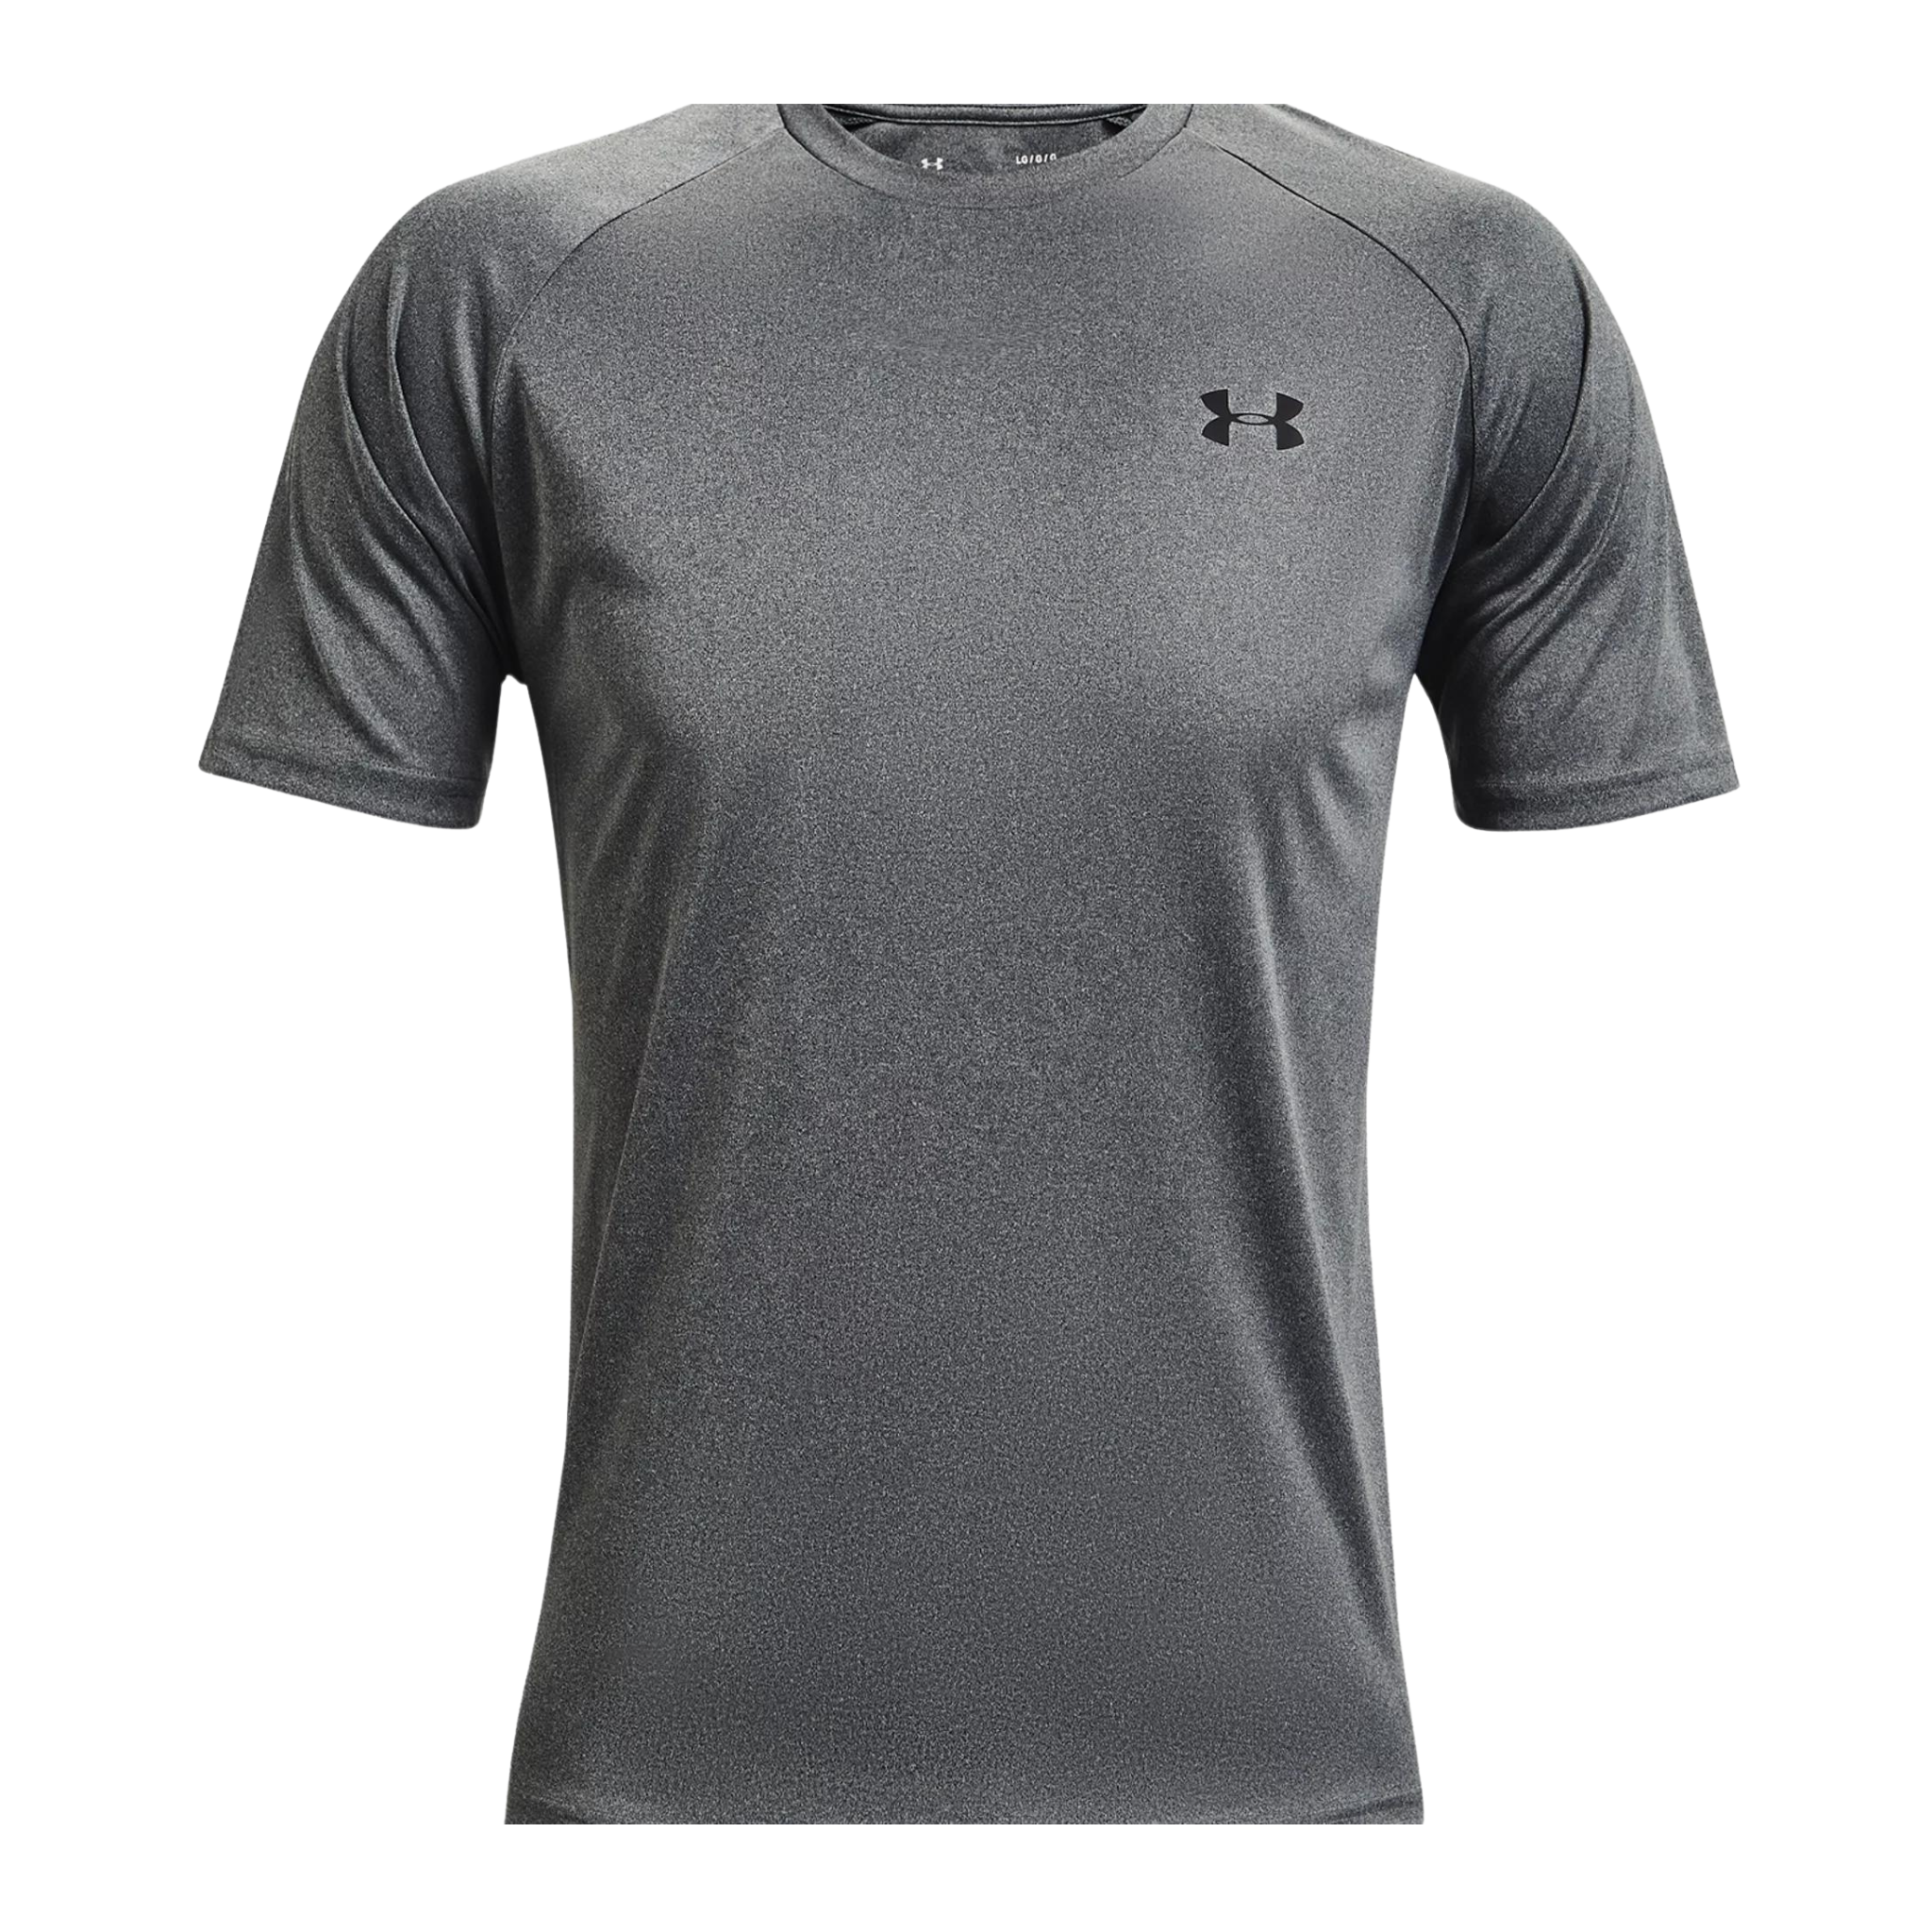 Under Armour Crew Neck Or V-Neck T-Shirts